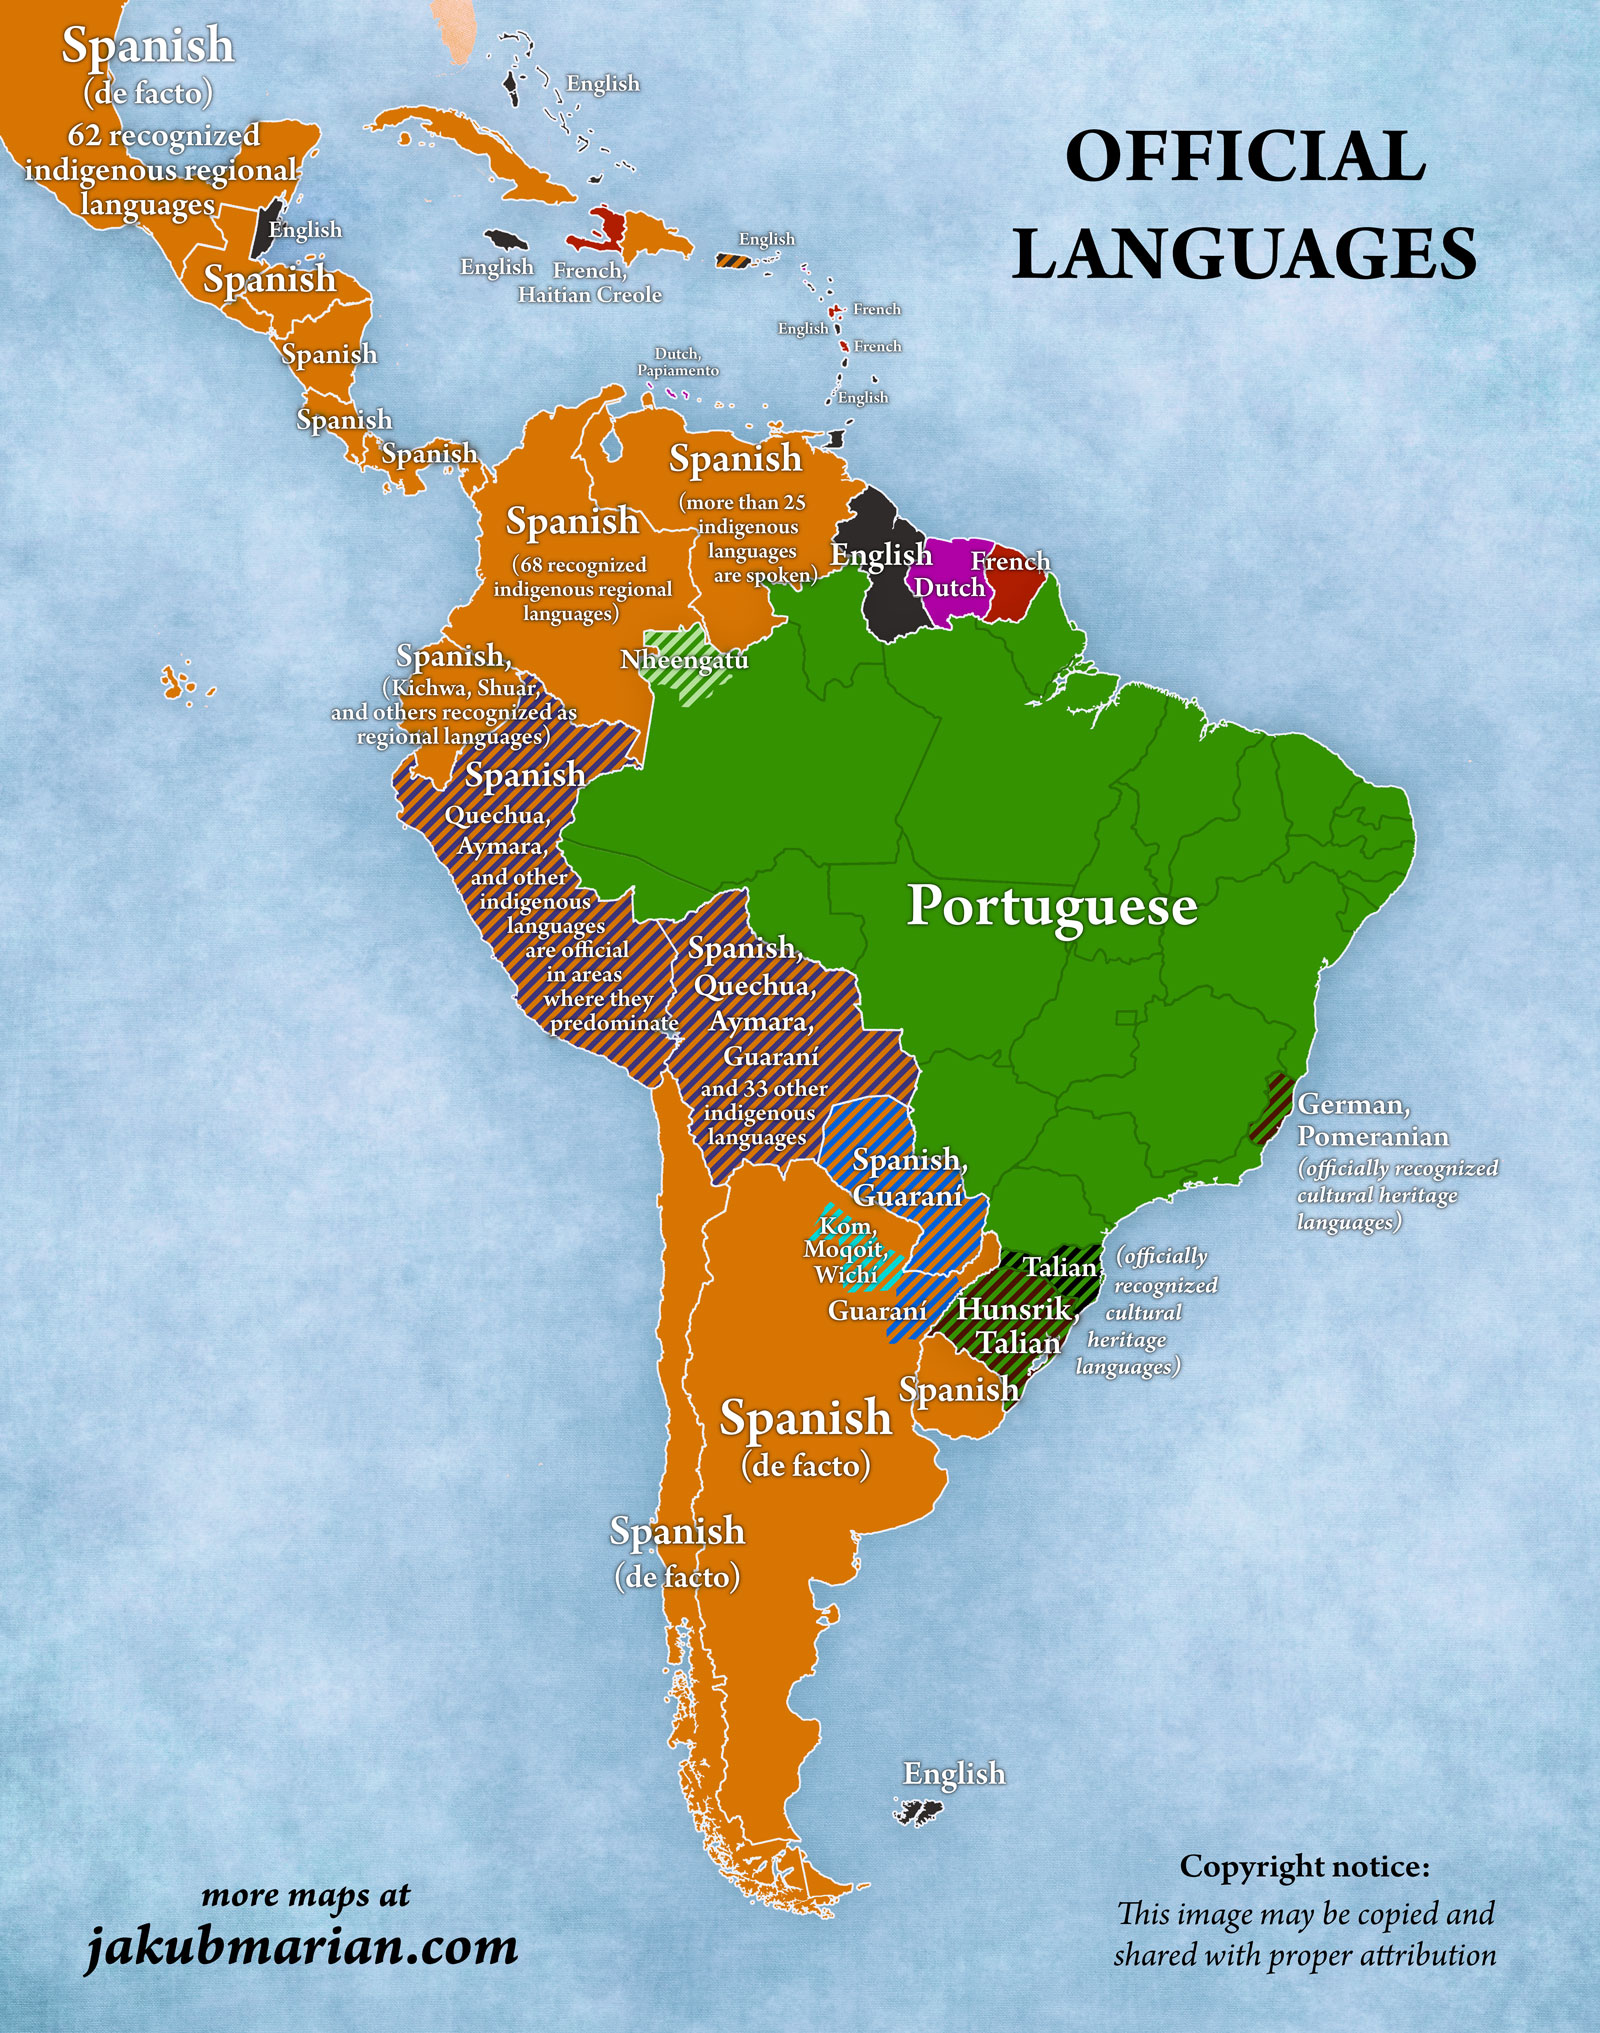 Official languages in South and Central America